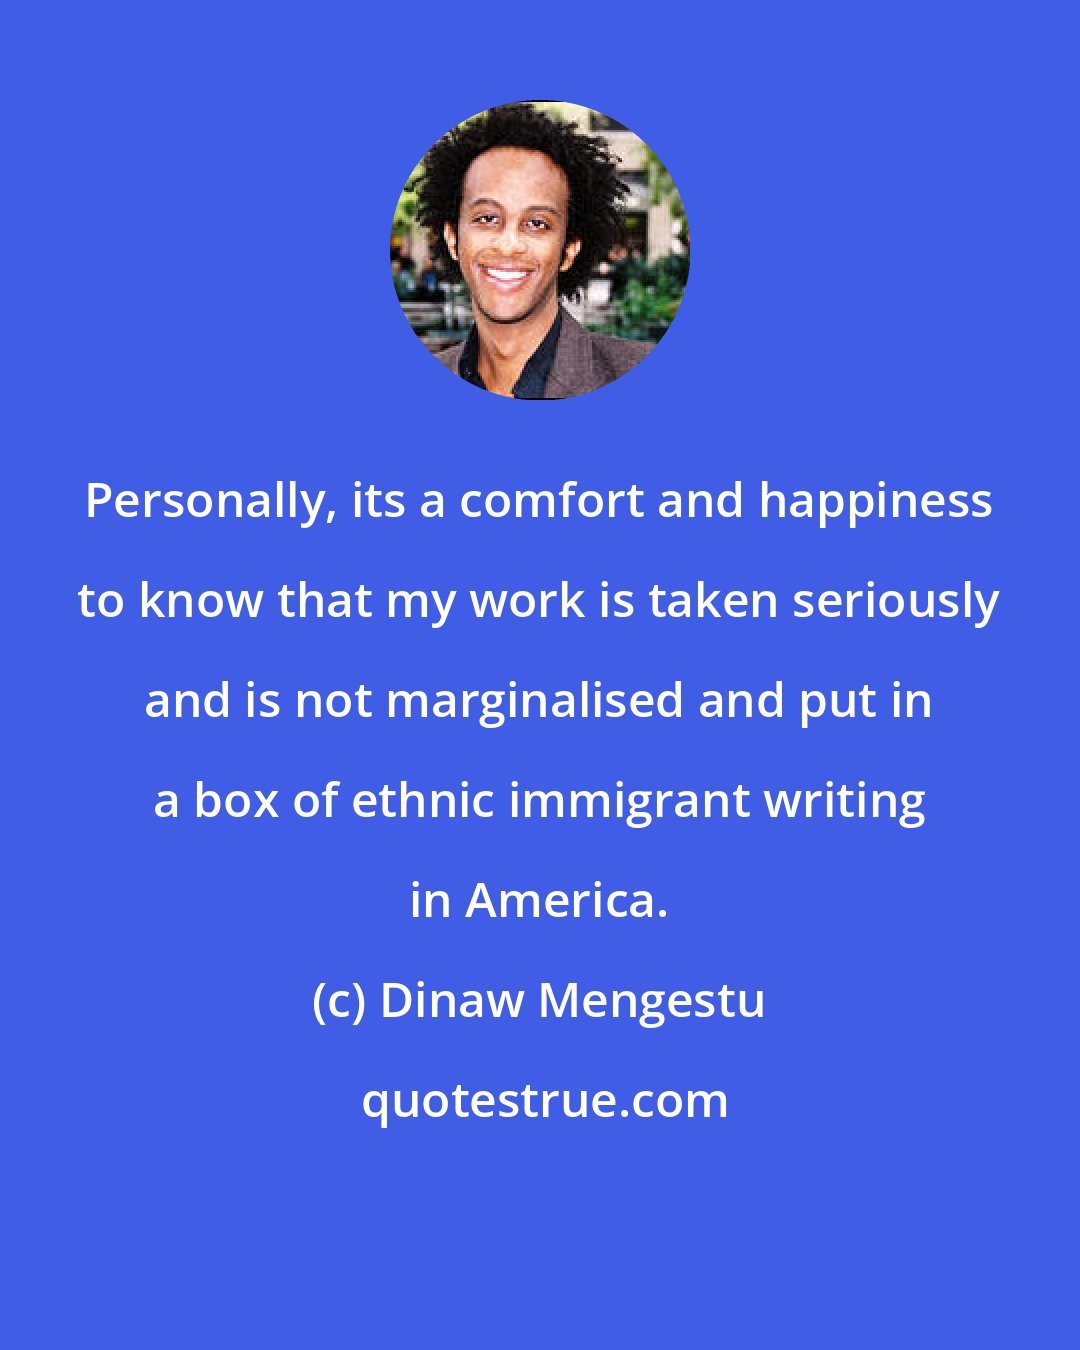 Dinaw Mengestu: Personally, its a comfort and happiness to know that my work is taken seriously and is not marginalised and put in a box of ethnic immigrant writing in America.